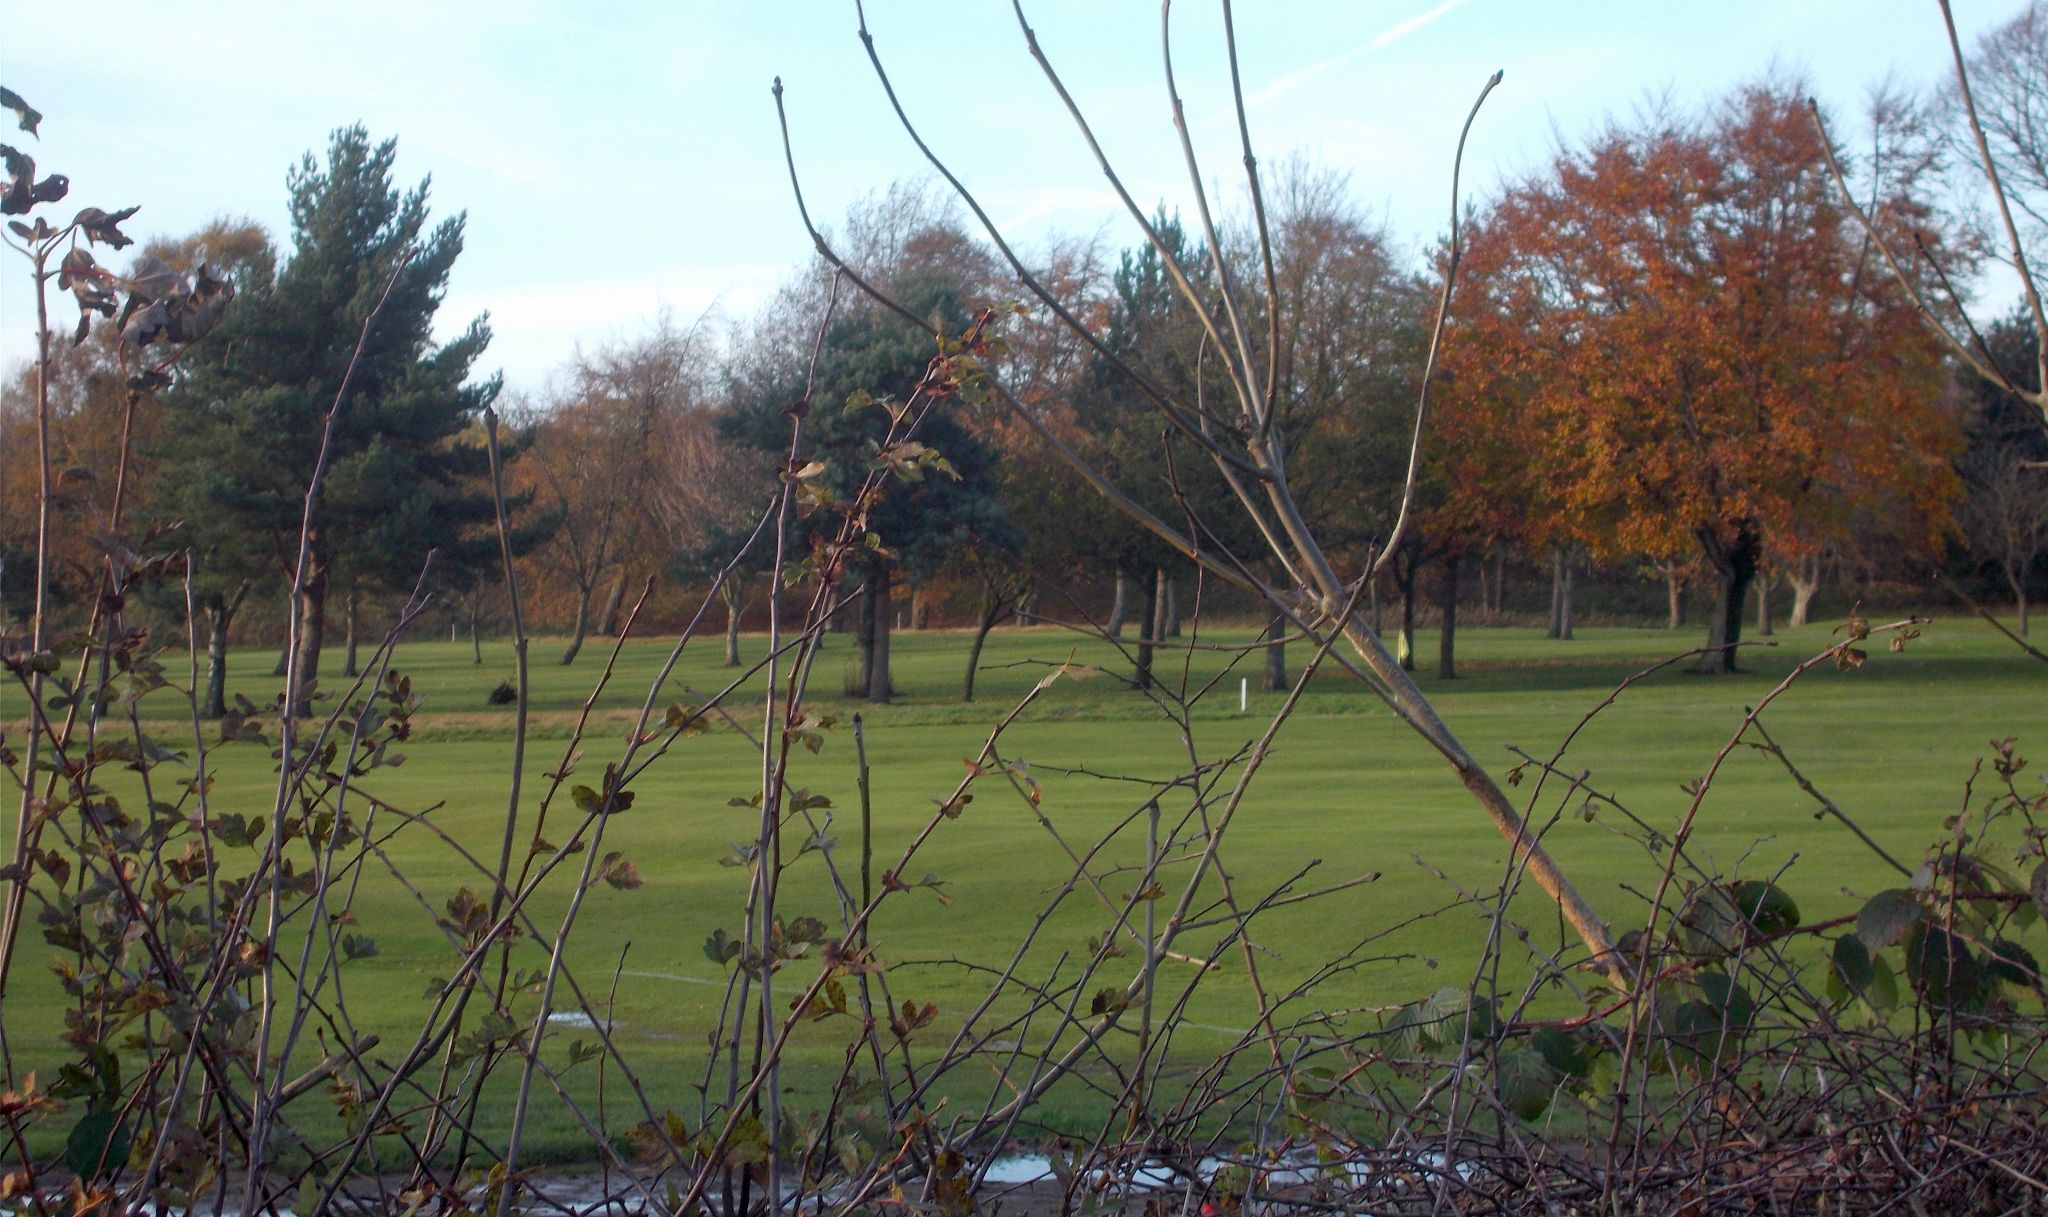 Haggs Castle Golf Course at entrance to Pollok Country Park from Dumbreck Road